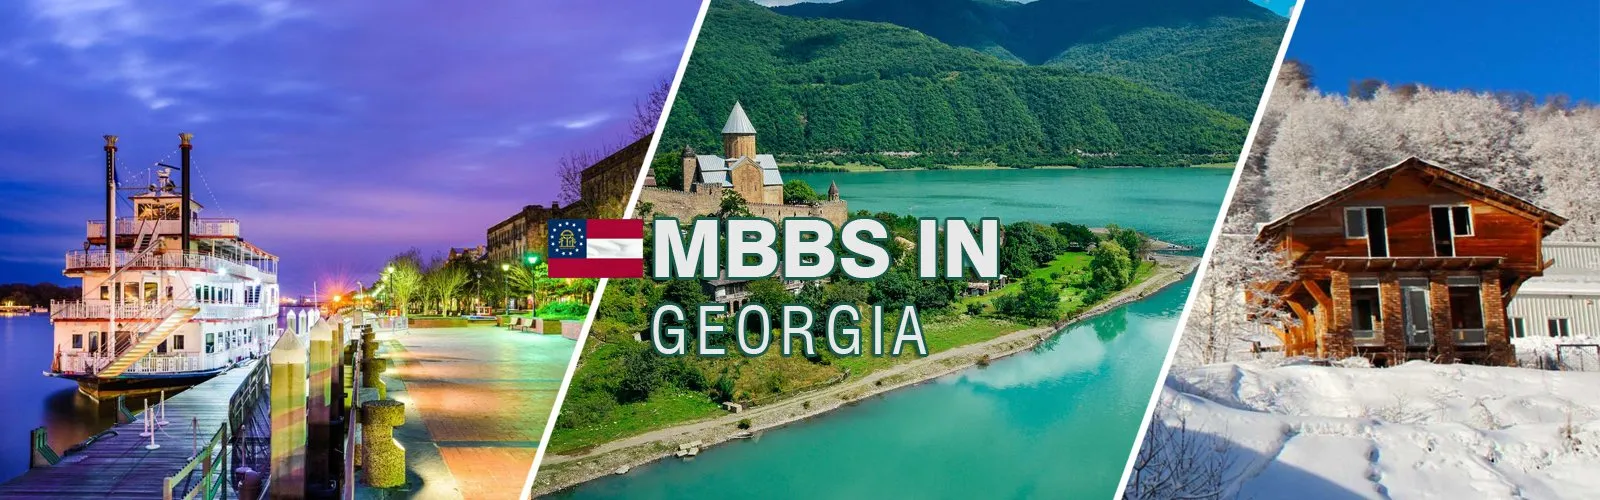 mbbs in georgia for indian students